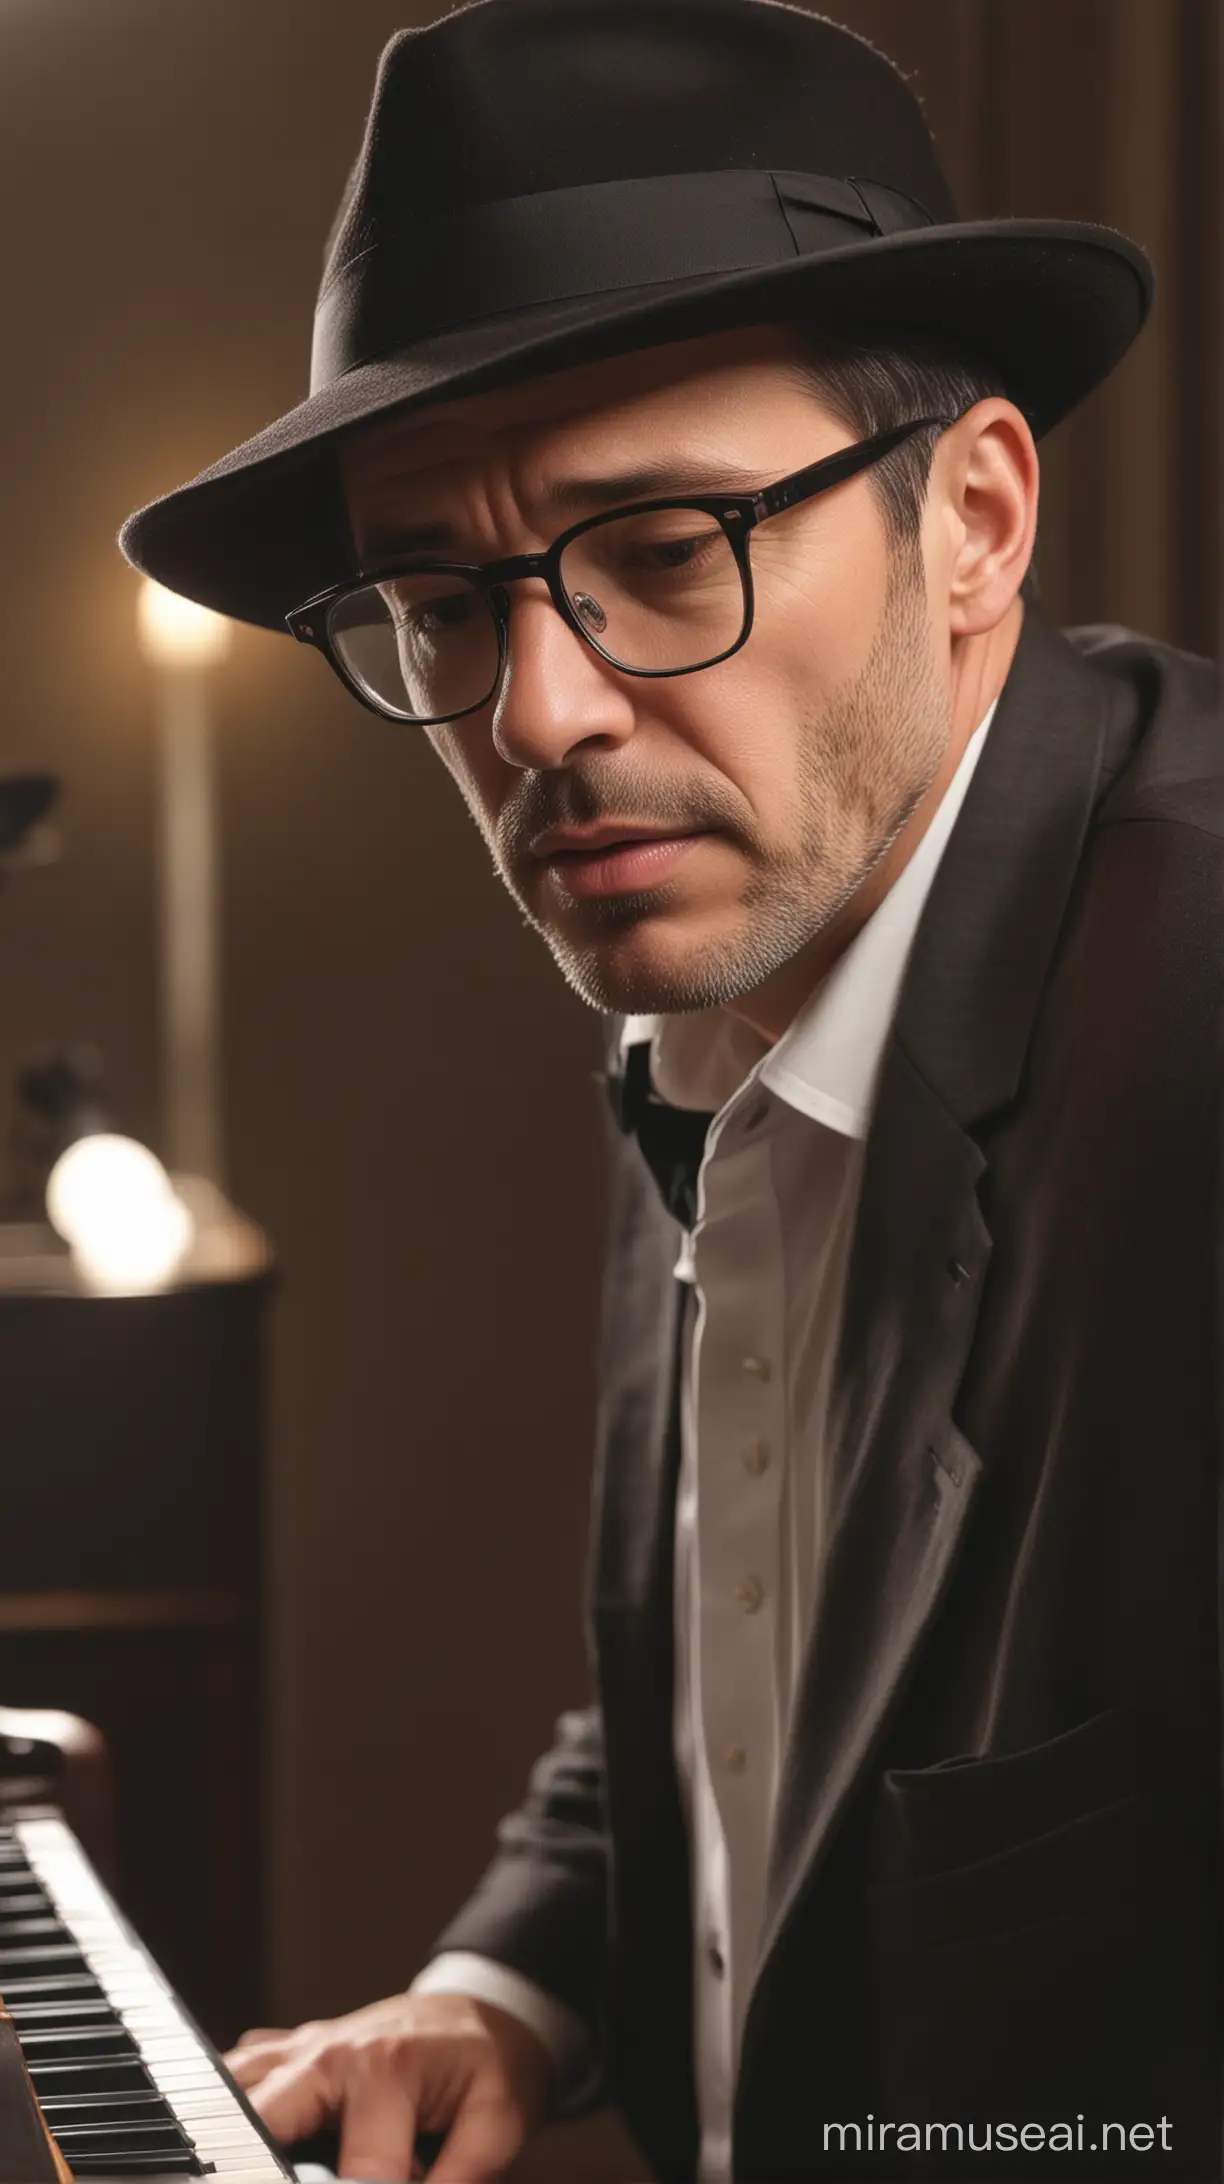 close up 46 year old man, wearing glasses, wearing a fedora hat, playing the grand piano while singing sadly, facing the audience in front.